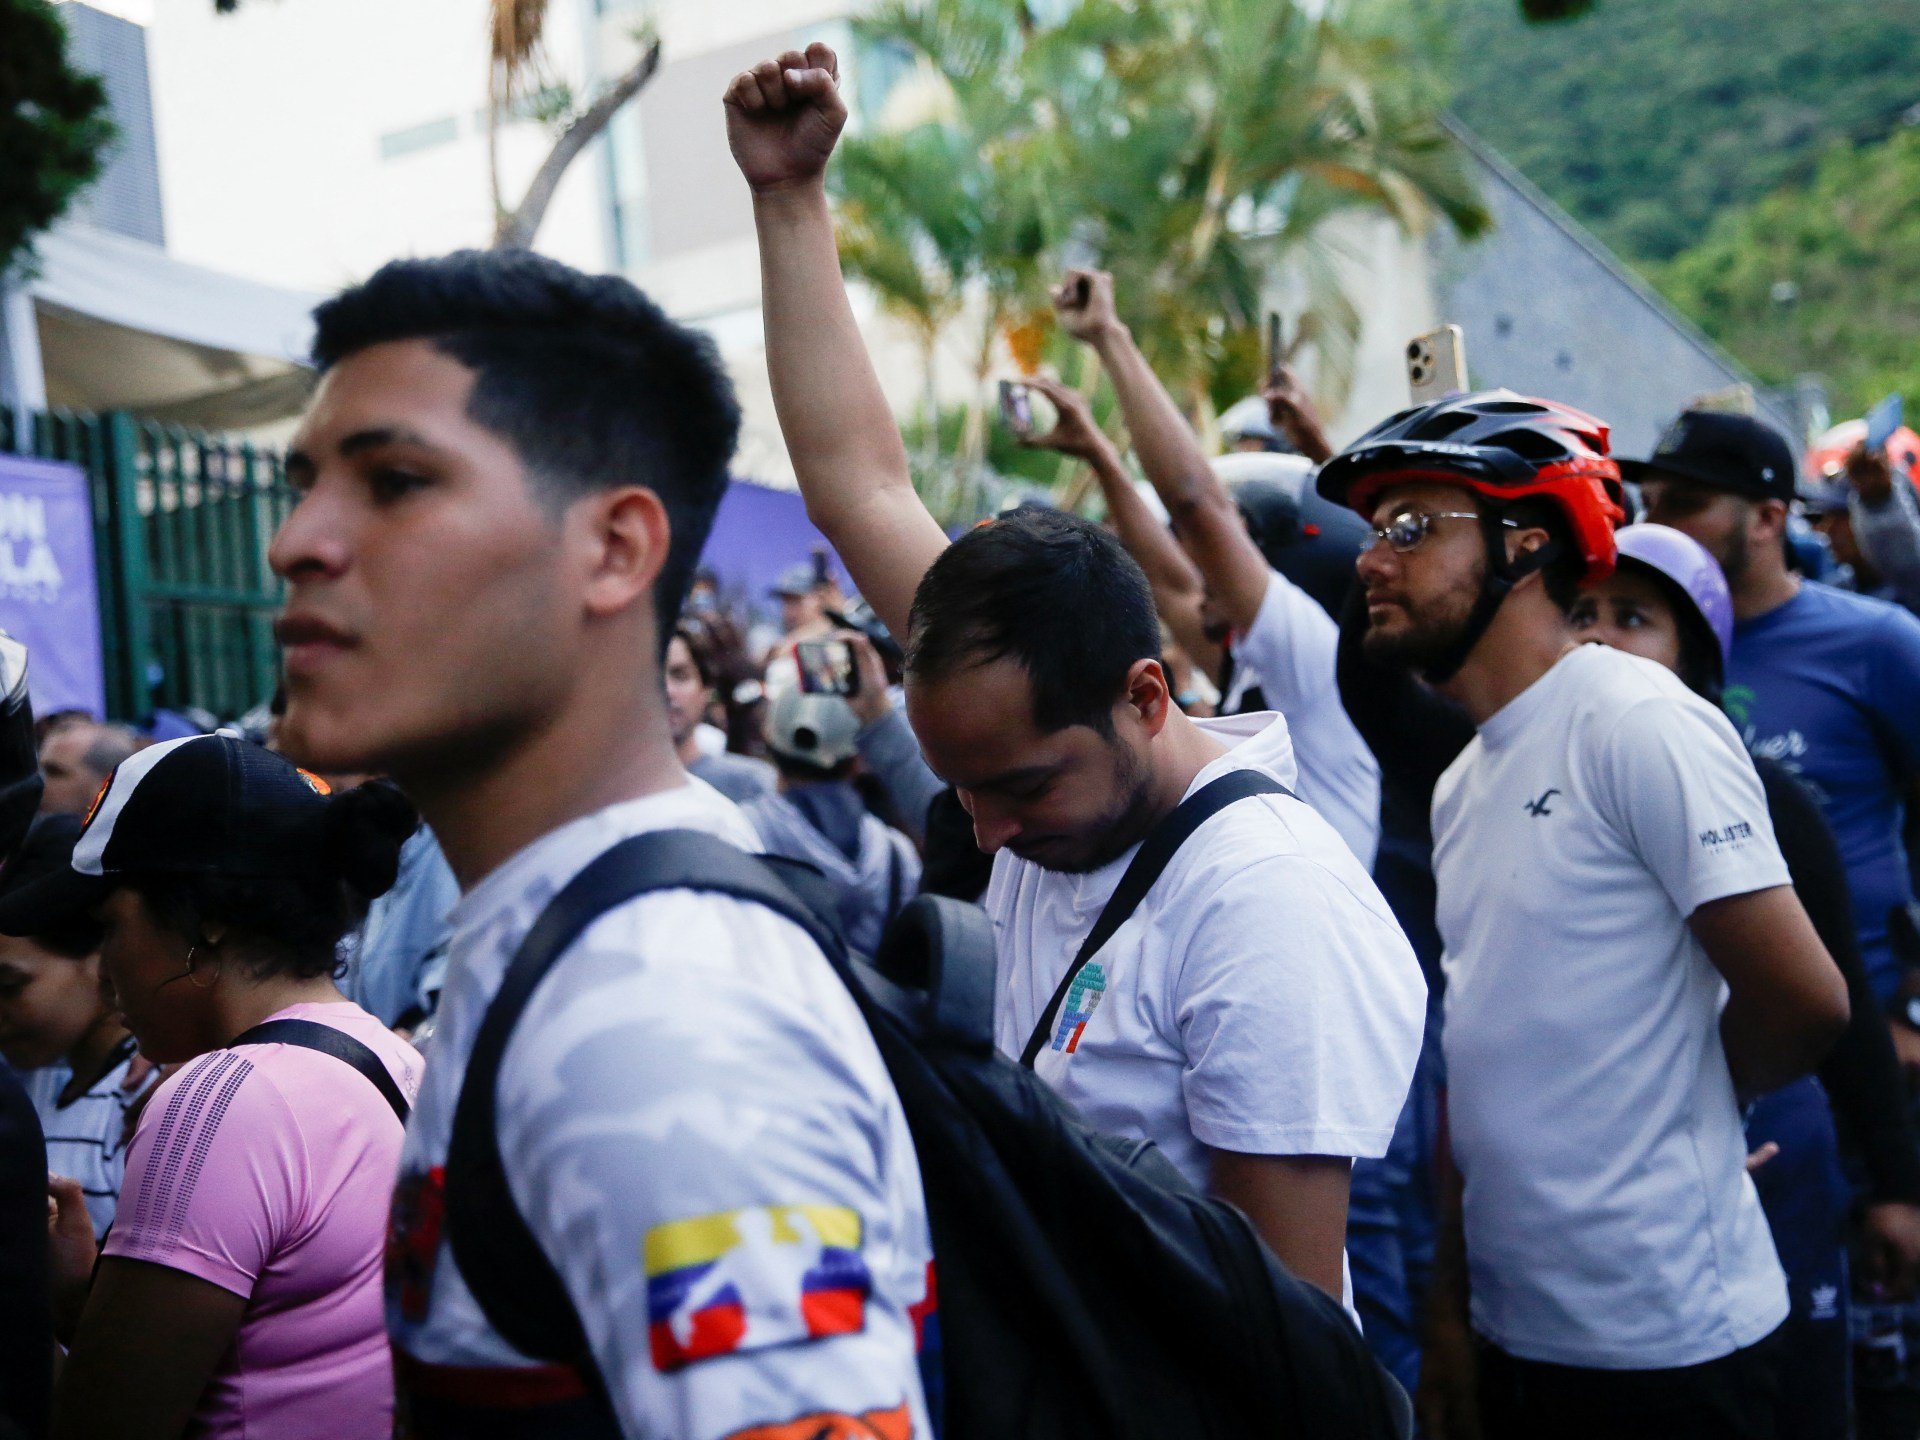 More protests loom in Venezuela as opposition disputes election results